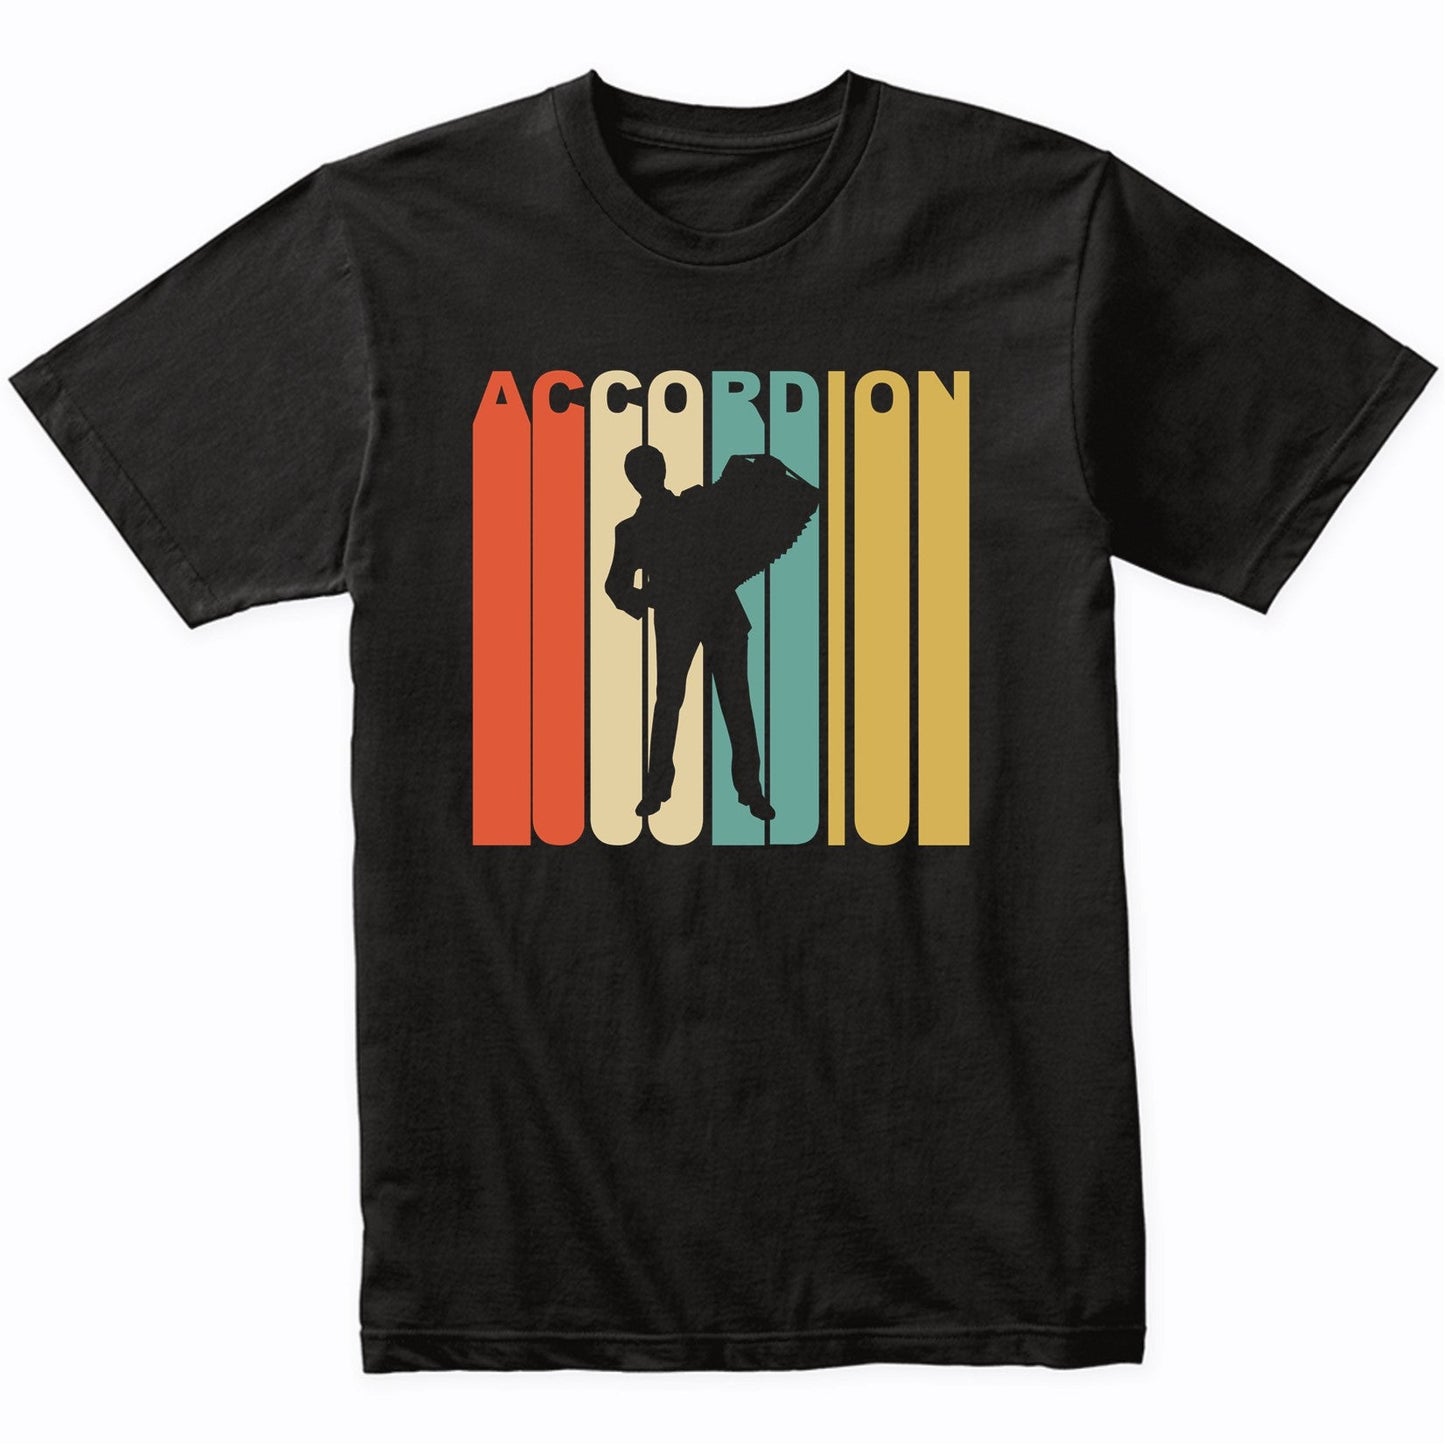 Retro 1970's Style Accordion Player Silhouette Music T-Shirt